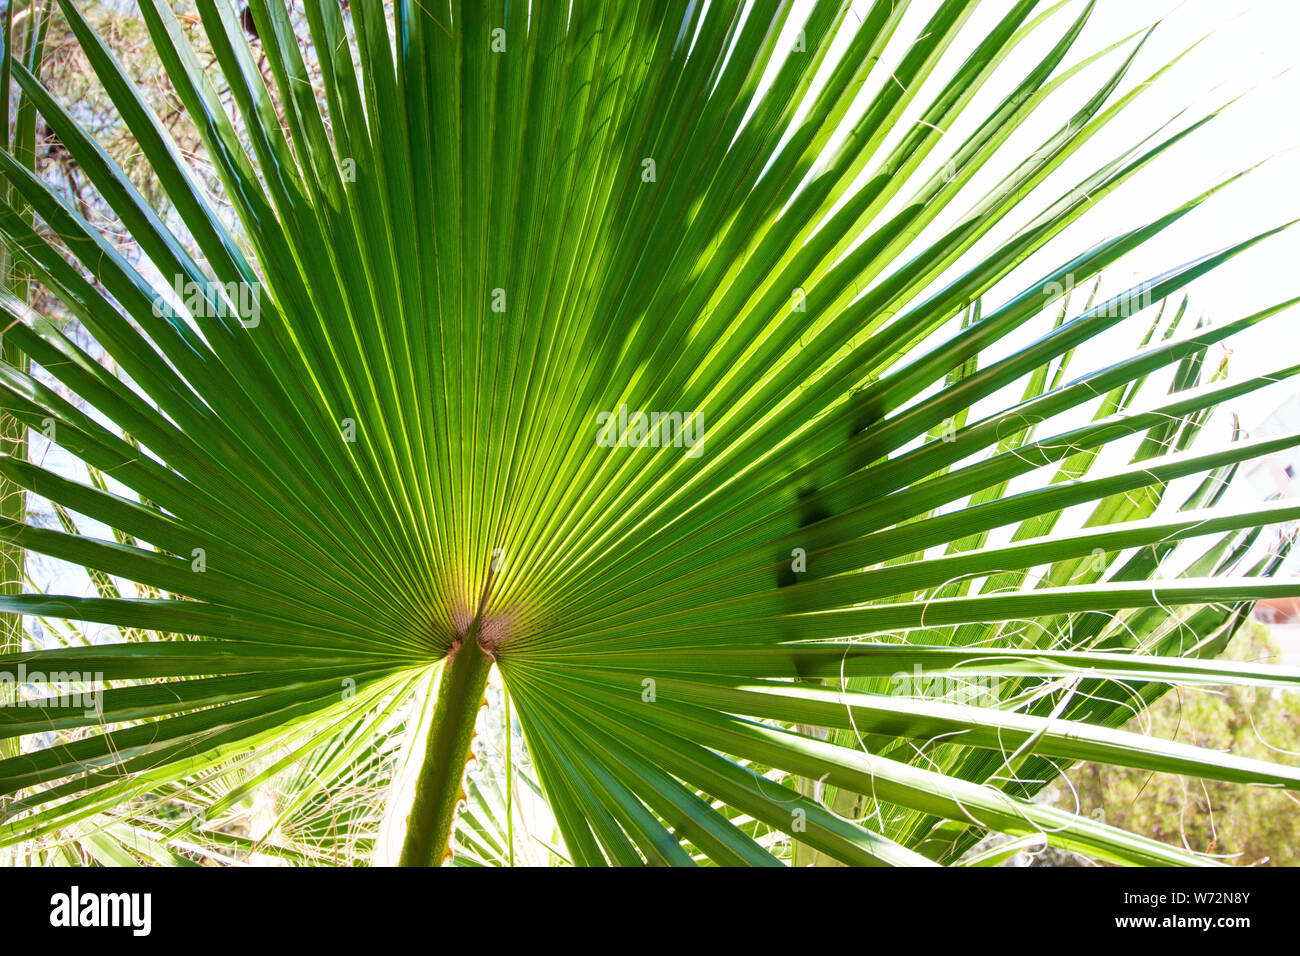 A large green leaf of a palm tree. The leaf is lit by a summer and bright sun. Stock Photo